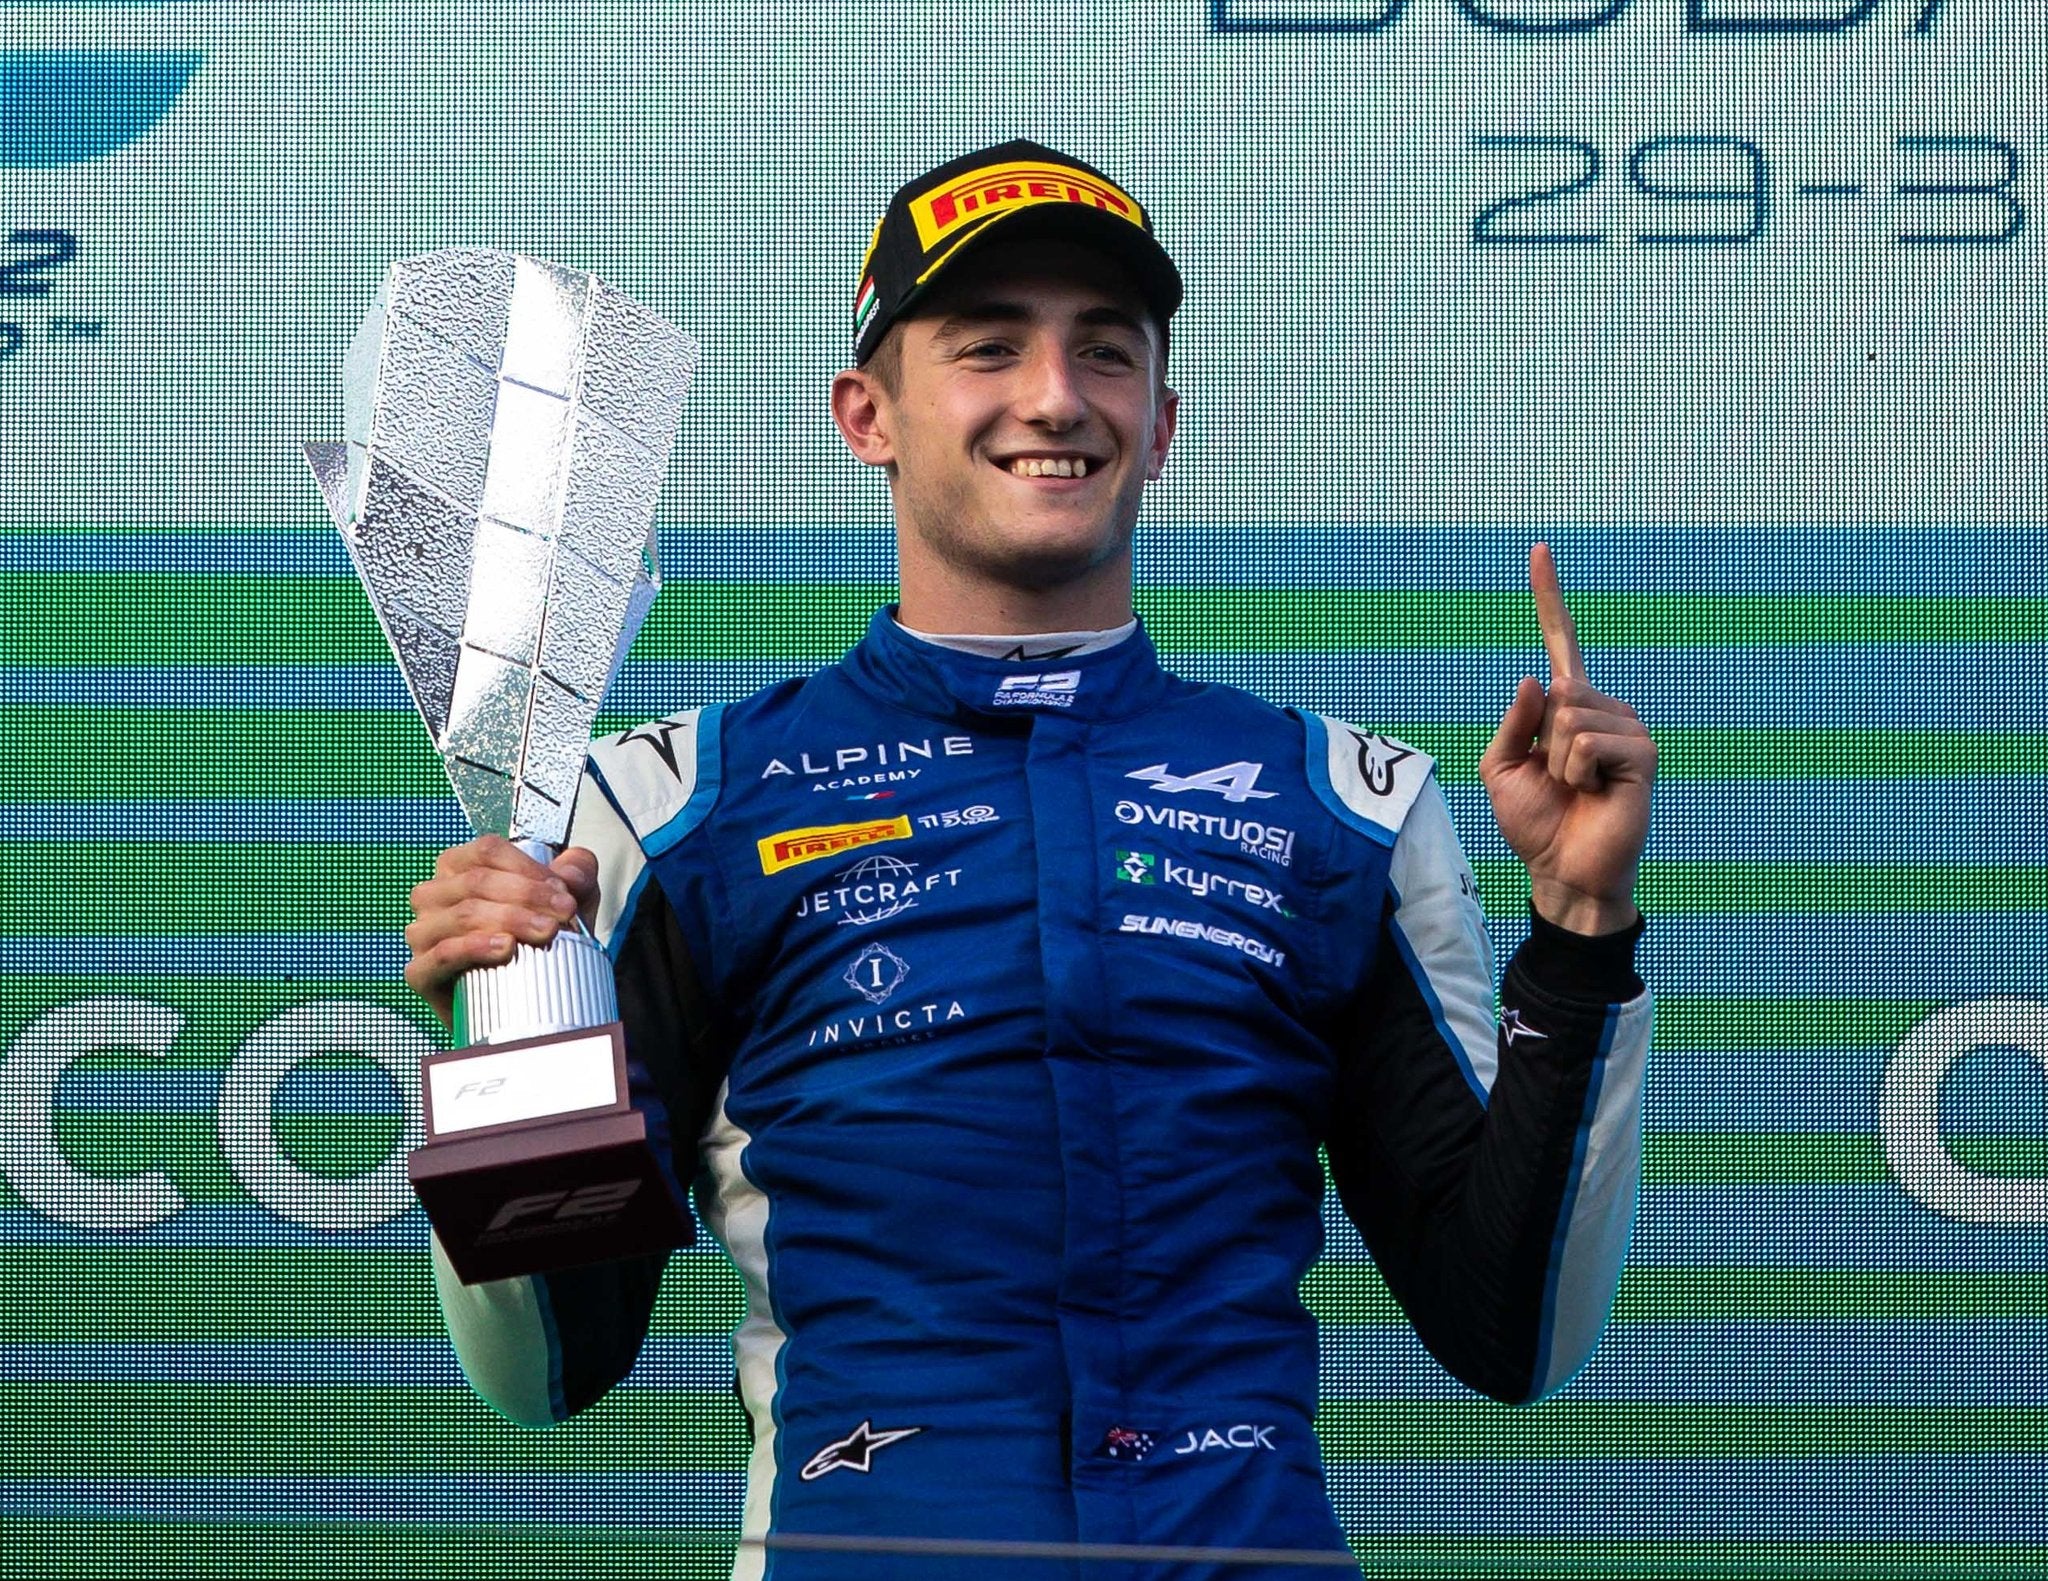 ALPINESTARS SCORE F2 DOUBLE-WIN IN BUDAPEST WITH JACK DOOHAN VICTORIOUS IN THE SPRINT RACE AND THEO POURCHAIRE THE FEATURE RACE WINNER IN HUNGARY